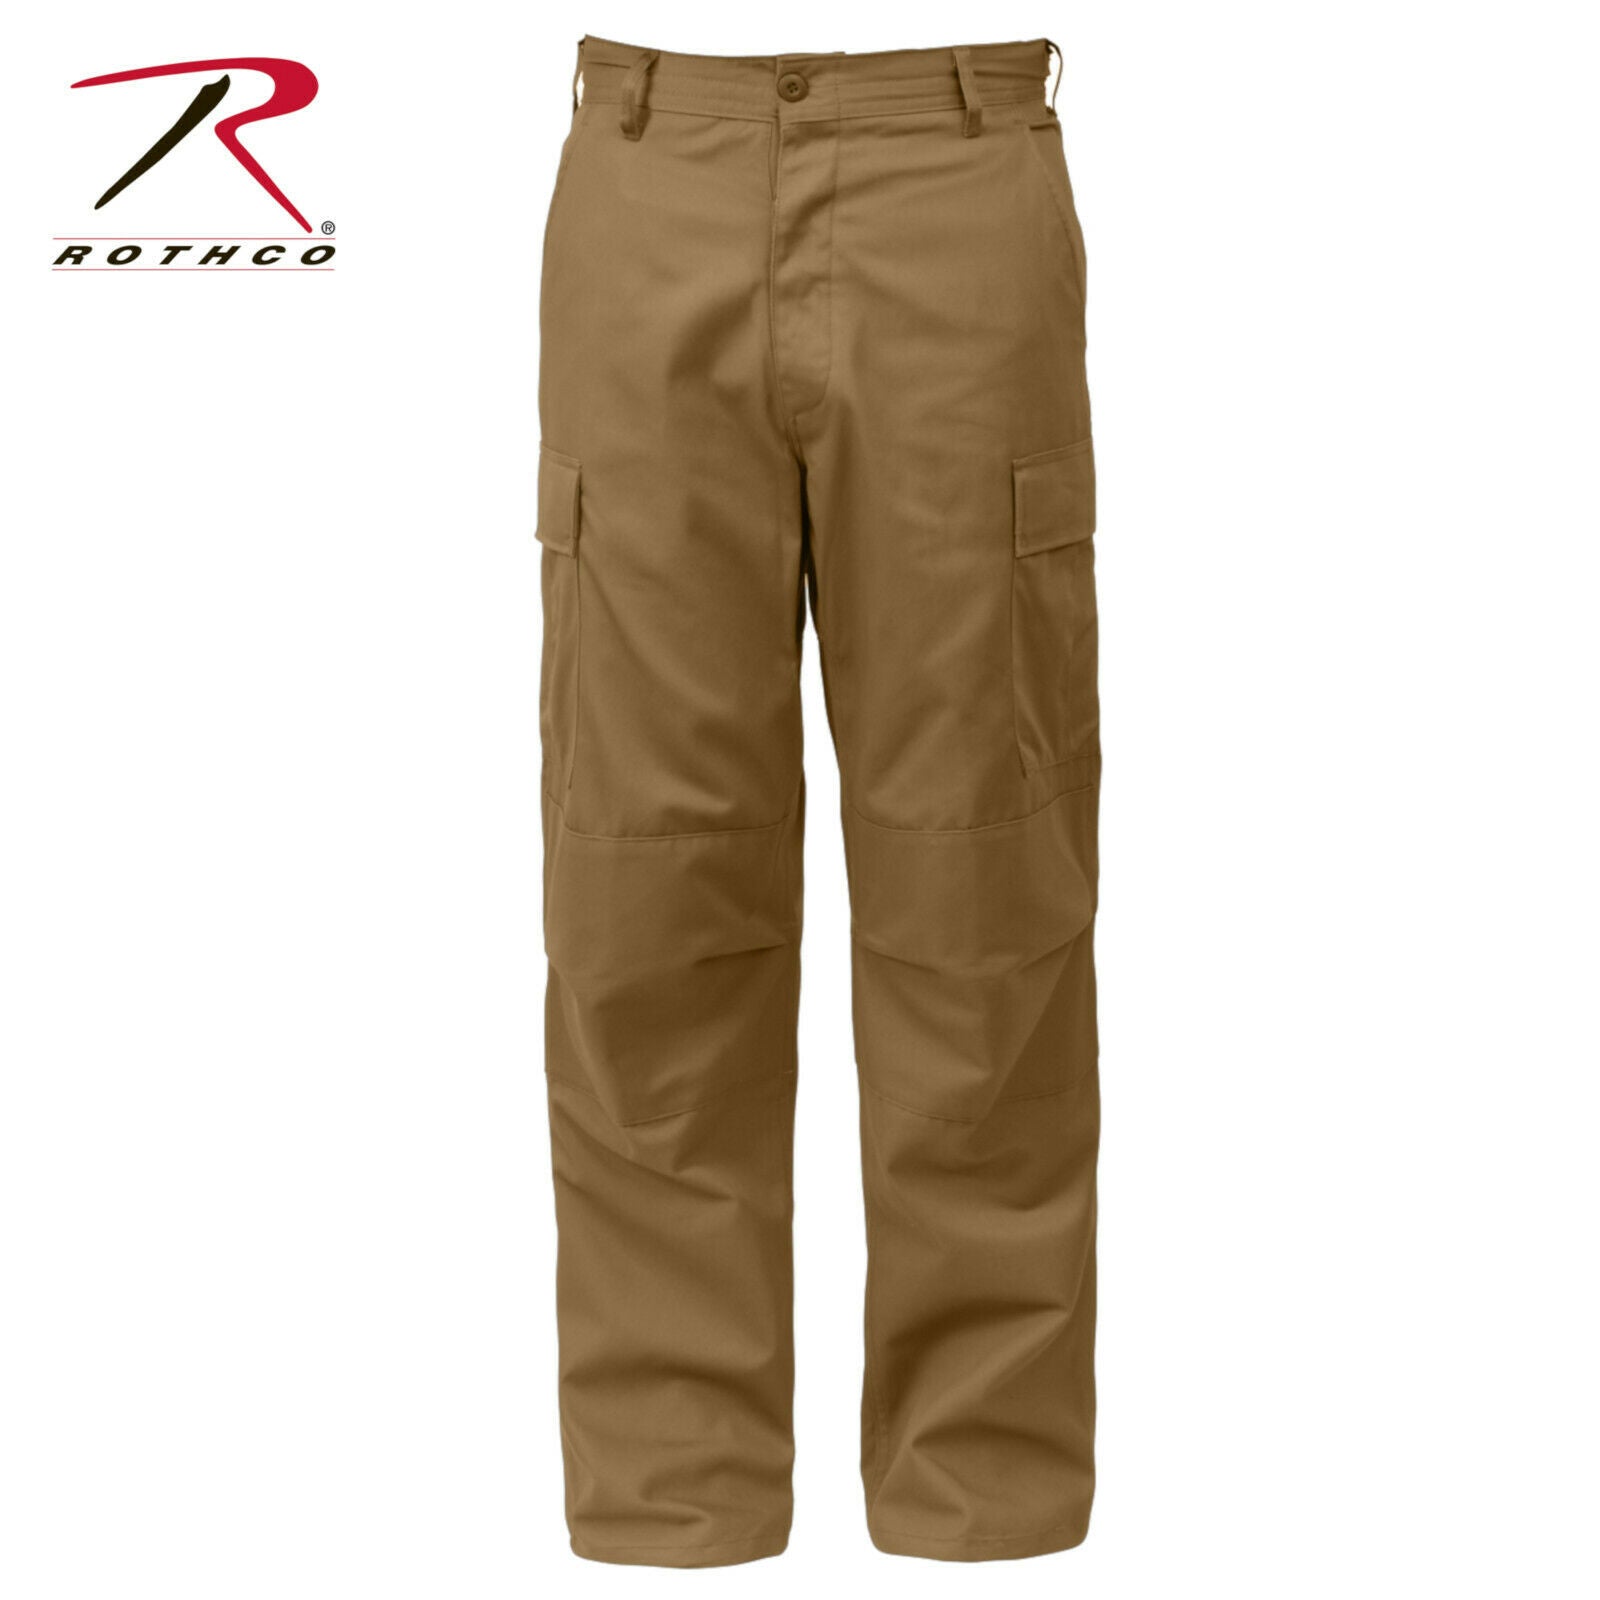 Shop Military Coyote Brown BDU Shorts - Fatigues Army Navy Gear